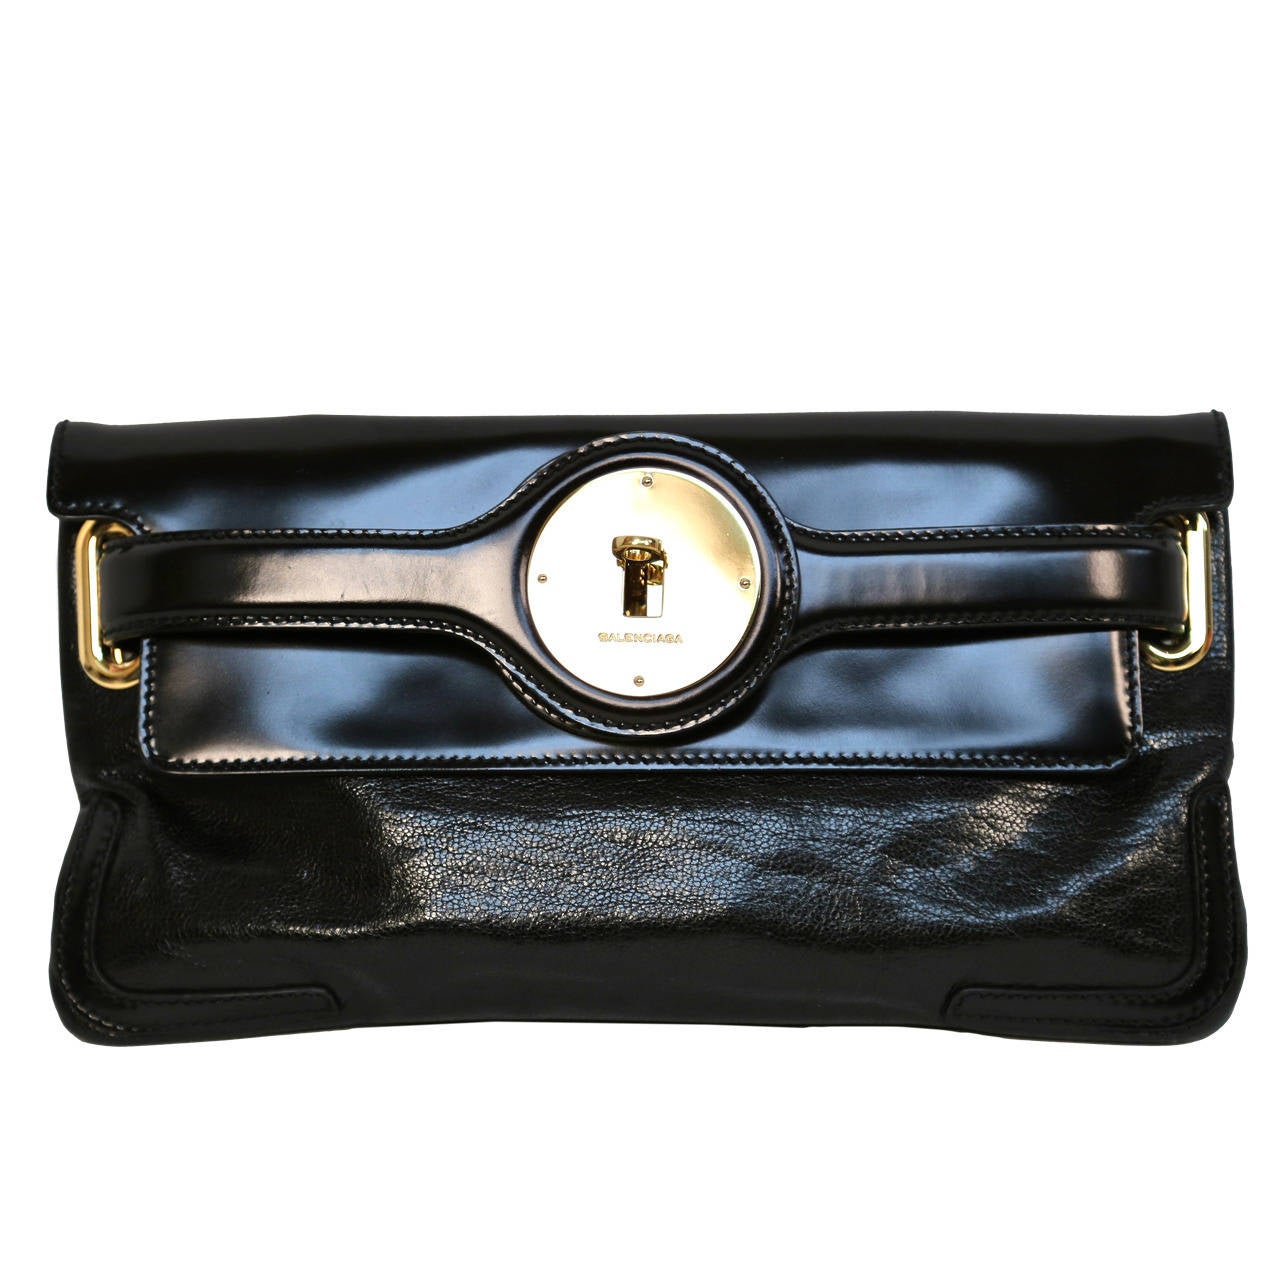 BALENCIAGA black leather 'Lune' clutch bag with gold hardware